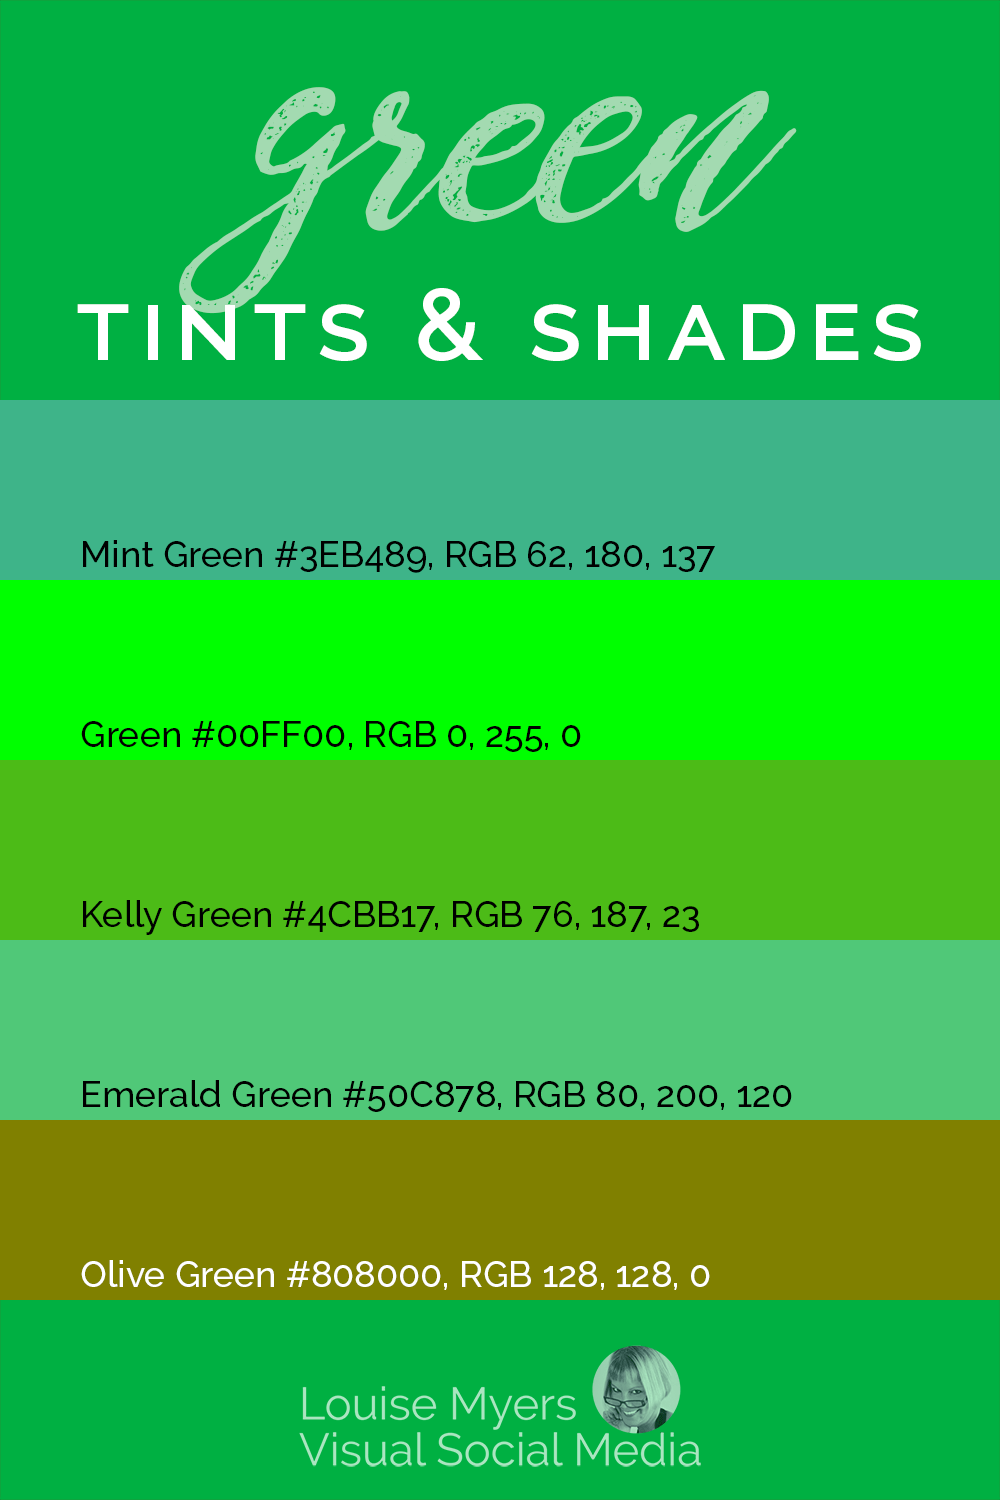 bands of green tints and shades from mint to olive lists hex codes and rgb values.